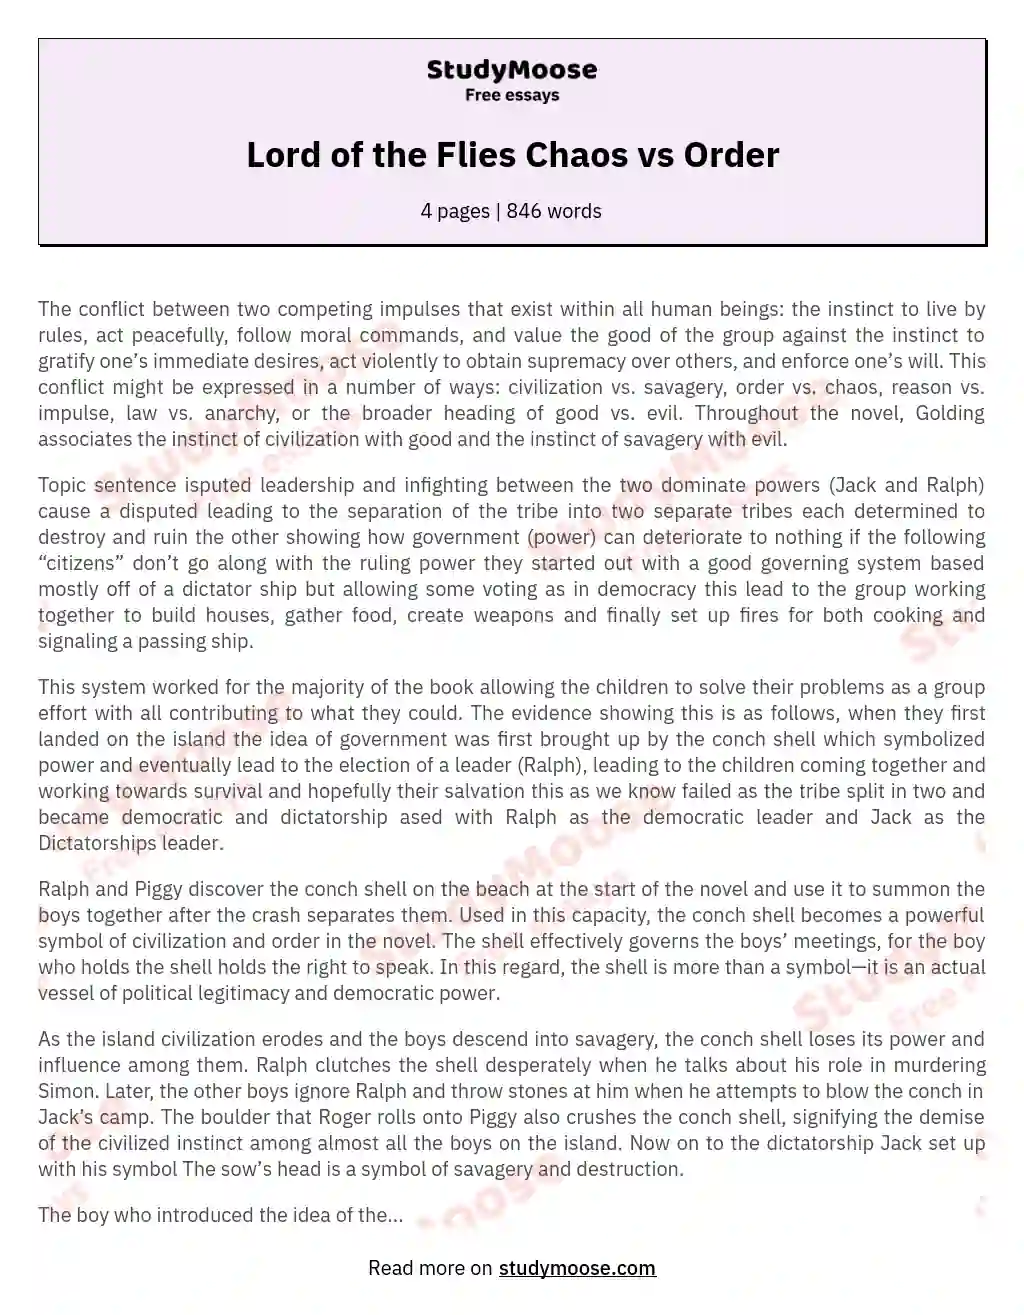 Lord of the Flies Chaos vs Order essay